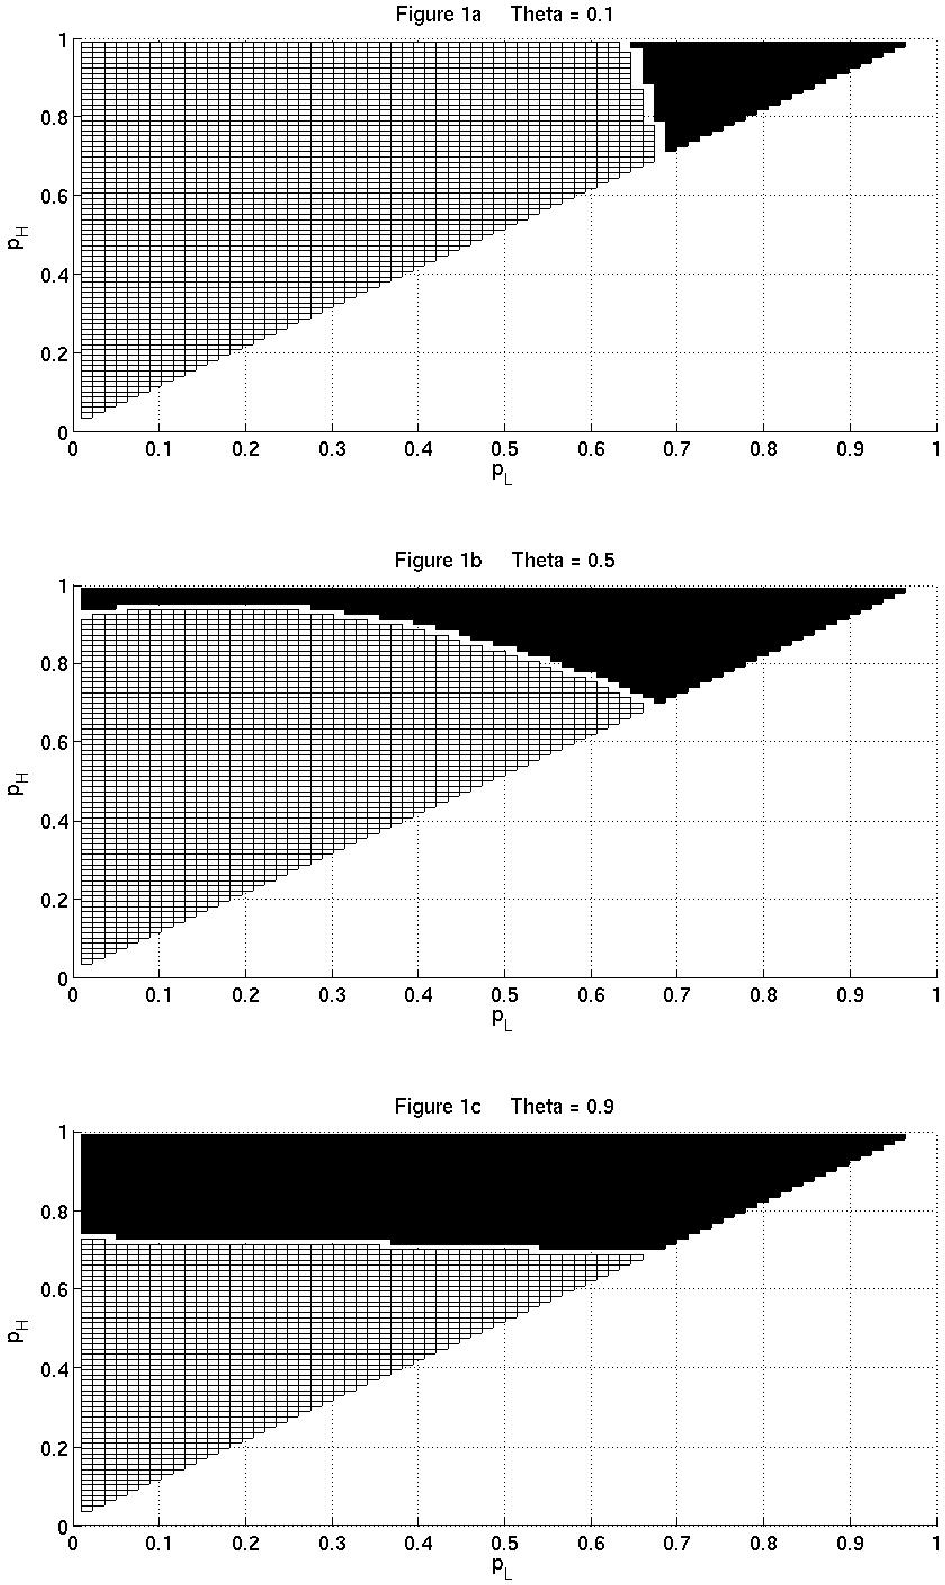 Three panels display the results over parameter space (pH, pL, theta) for three different levels of theta.  The X axis of each panel displays the parameter pL from 0 to 1 and the Y axis of each panel displays the parameter pH from 0 to 1.  The first panel shows the triangular parameter space (pH, pL) for the theta value of 0.1.  The second and third panels show the same space for the theta value of 0.5 and 0.9, respectively.  In each parameter space, the dark region is where the outside bank's expected interest rate is greater than the inside bank's expected interest rate, and the light region is where the inside bank's expected interest rate is greater than the outside bank's expected interest rate.  In the graph with theta value of 0.1, the light region covers the majority of the triangle, while the dark region only covers the tip of the triangle on the right of the graph.  When theta equals 0.5, the light region still dominates the parameter space, but the dark region covers more of the top part of the triangle.  For theta value of 0.9, the dark region completely covers the top of the triangle in the shape of a trapezoid.  Therefore, the division between the dark and light regions horizontally bisects the triangle where each region covers half of the total parameter space.